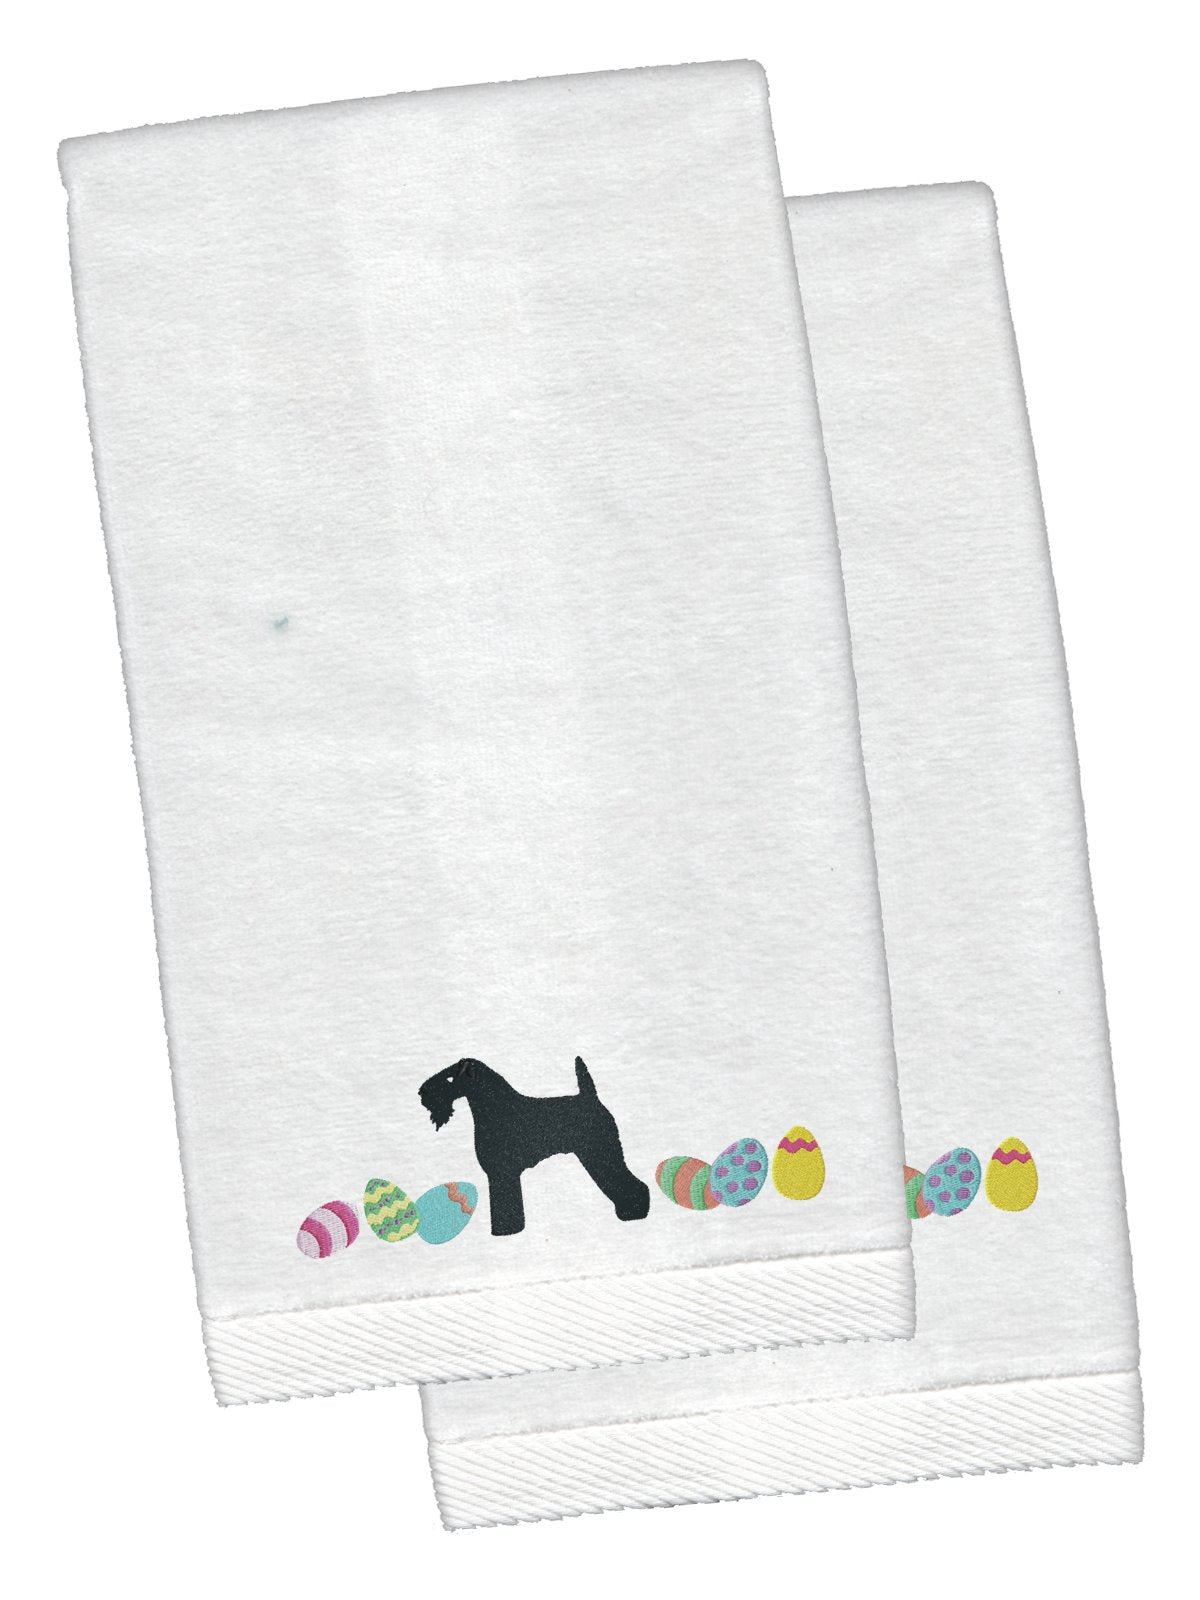 Kerry Blue Terrier Easter White Embroidered Plush Hand Towel Set of 2 CK1659KTEMB by Caroline's Treasures